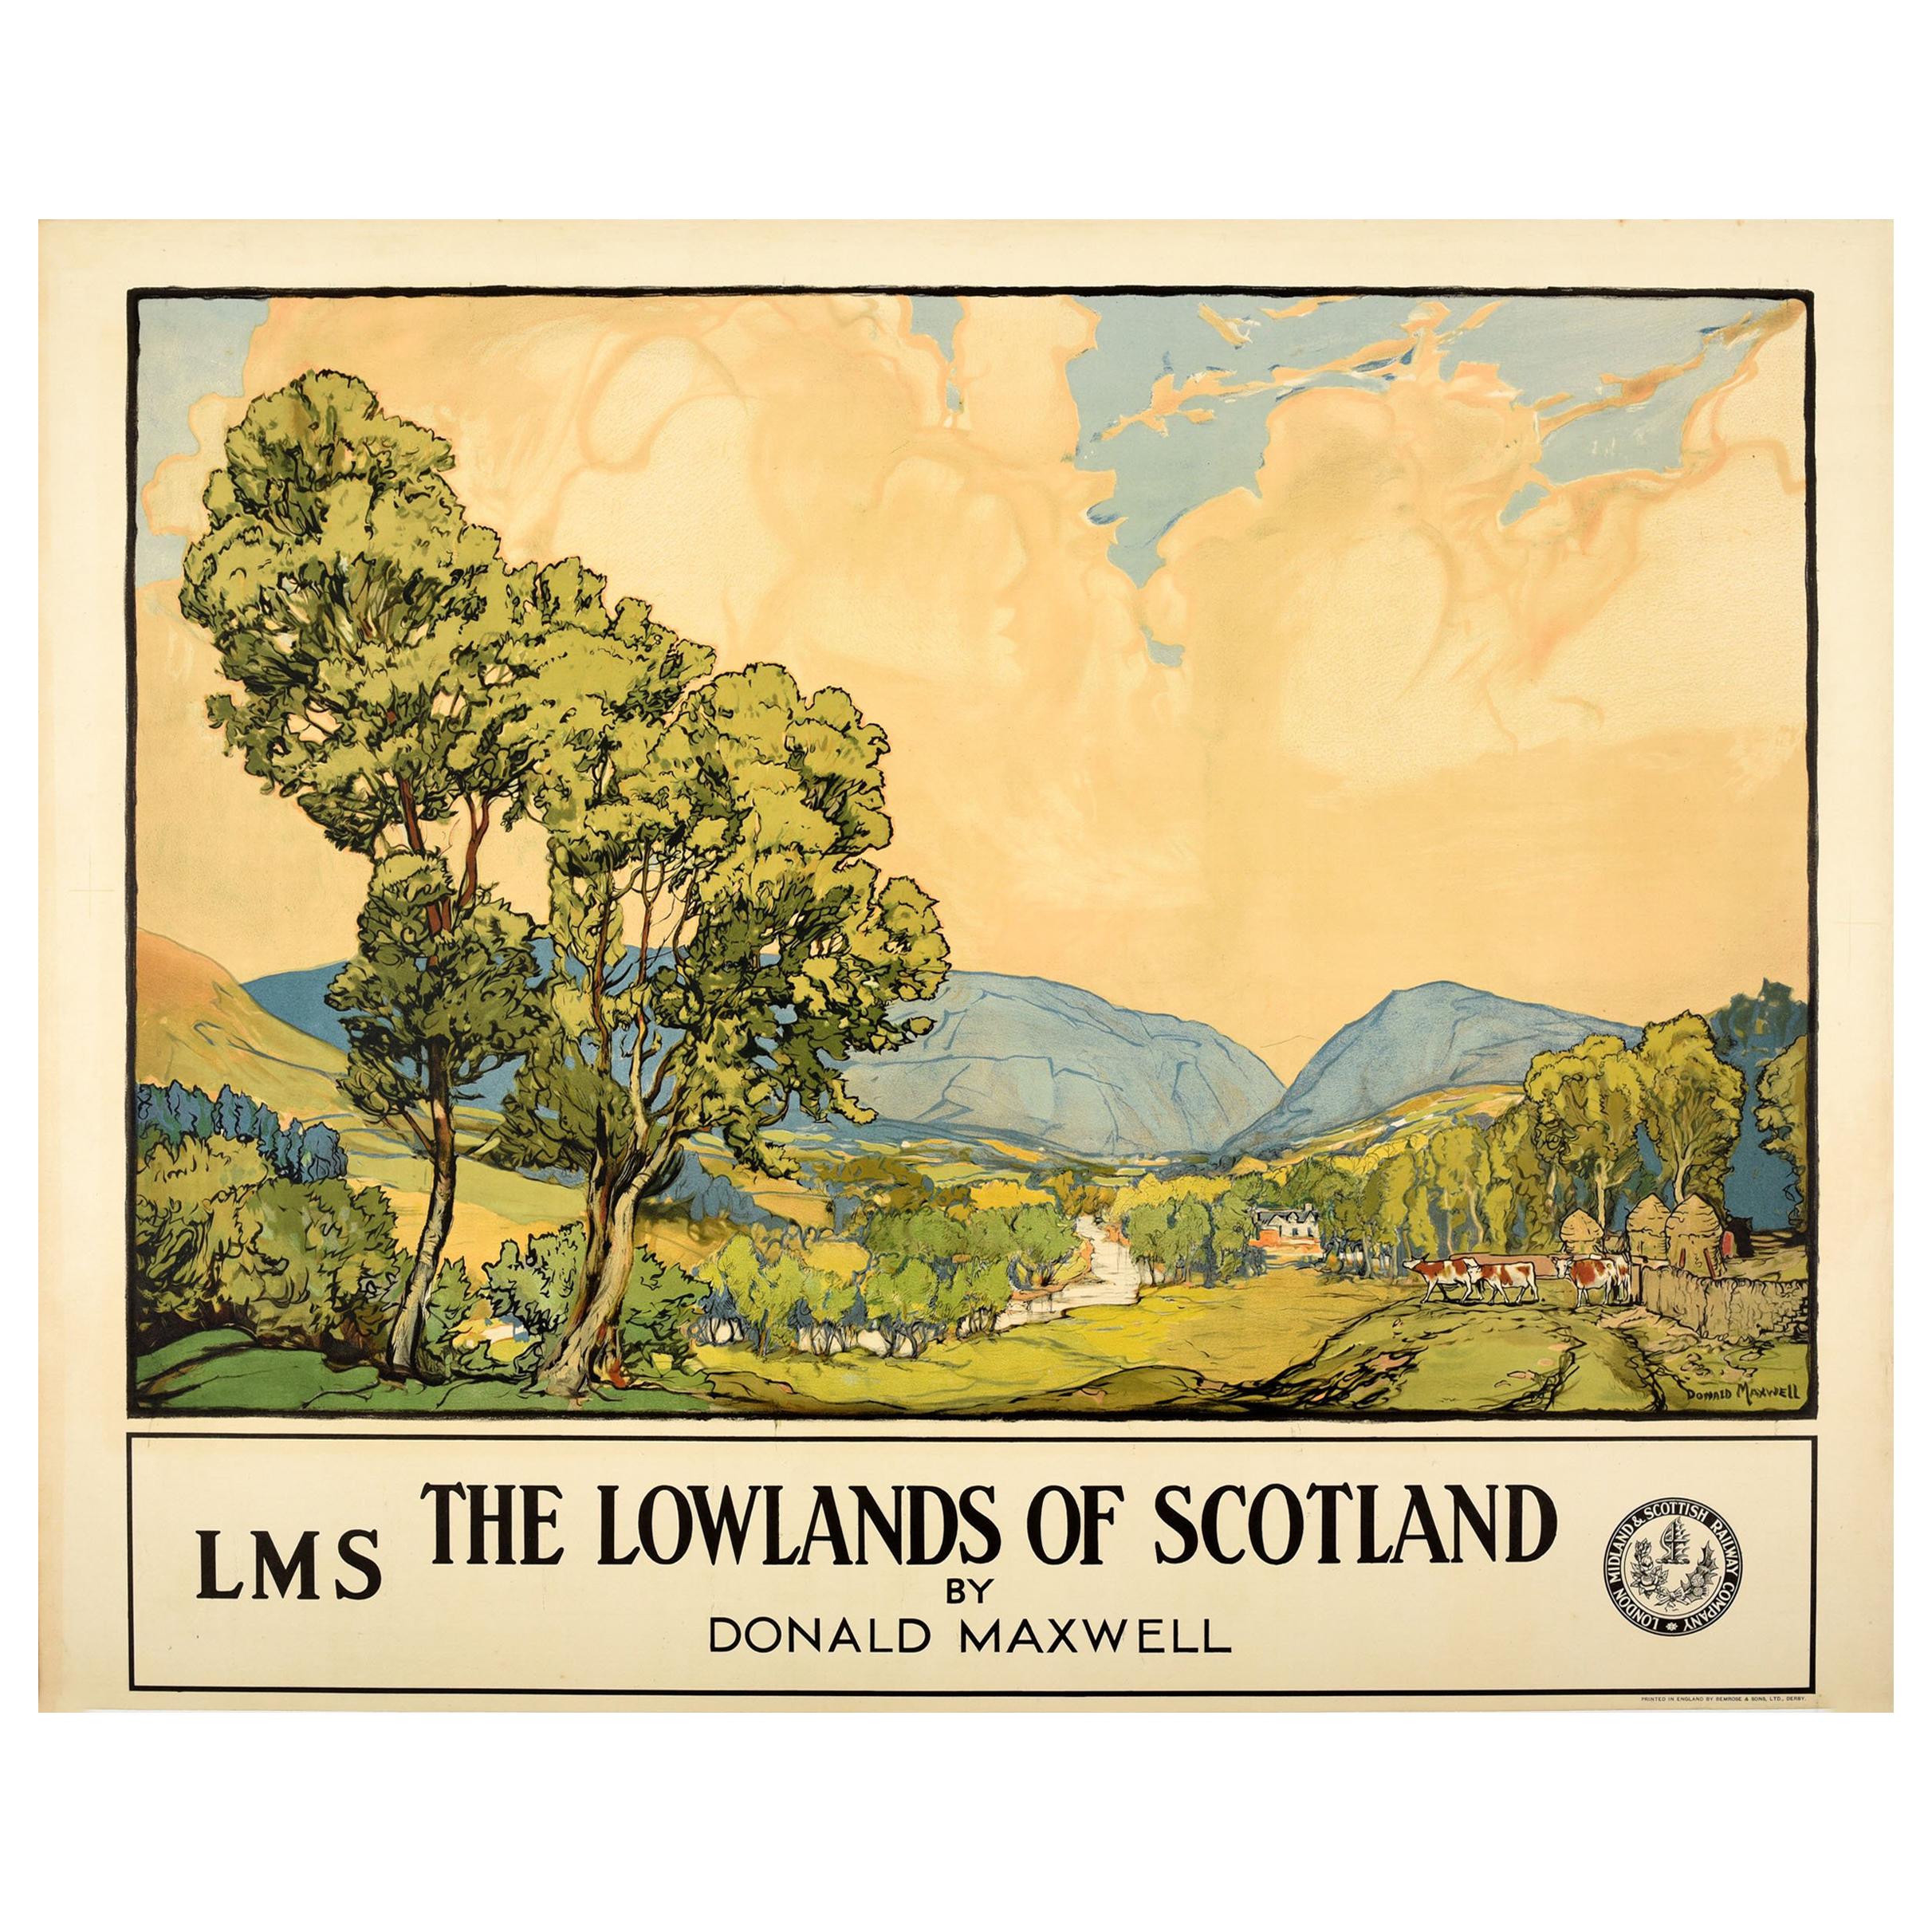 Original Vintage LMS Railway Poster The Lowlands of Scotland by Donald Maxwell